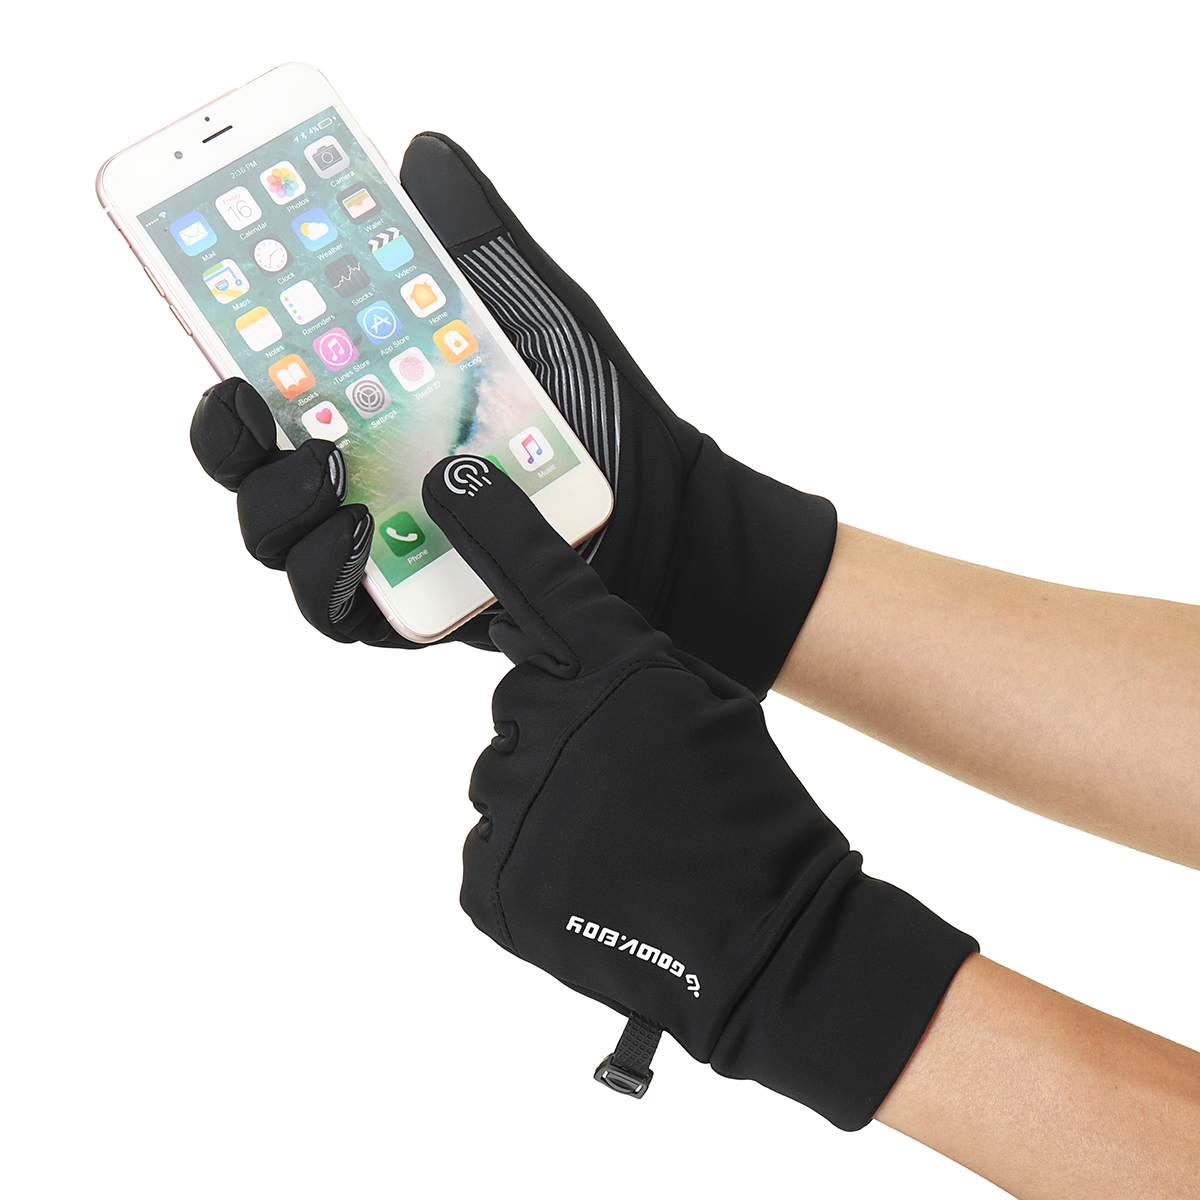 Winter-Warm-Touch-Screen-Thermal-Gloves-Ski-Snow-Snowboard-Cycling-Waterproof-Winter-Gloves-1921750-4